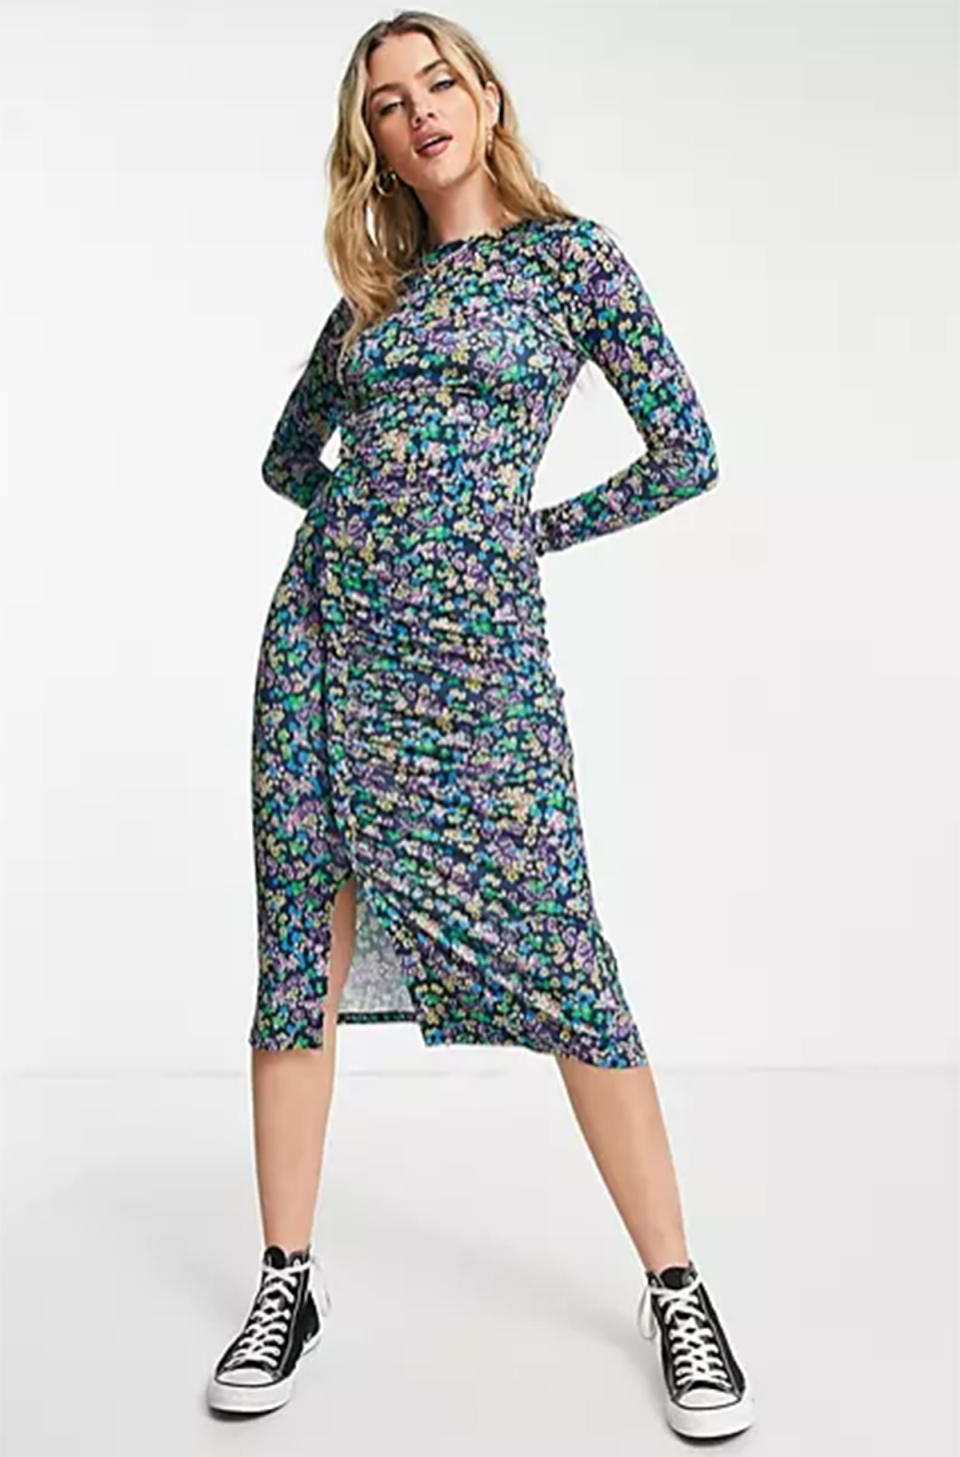 ASOS DESIGN midi dress with frill ruched detail in blue ditsy floral, $56. Photo: ASOS.